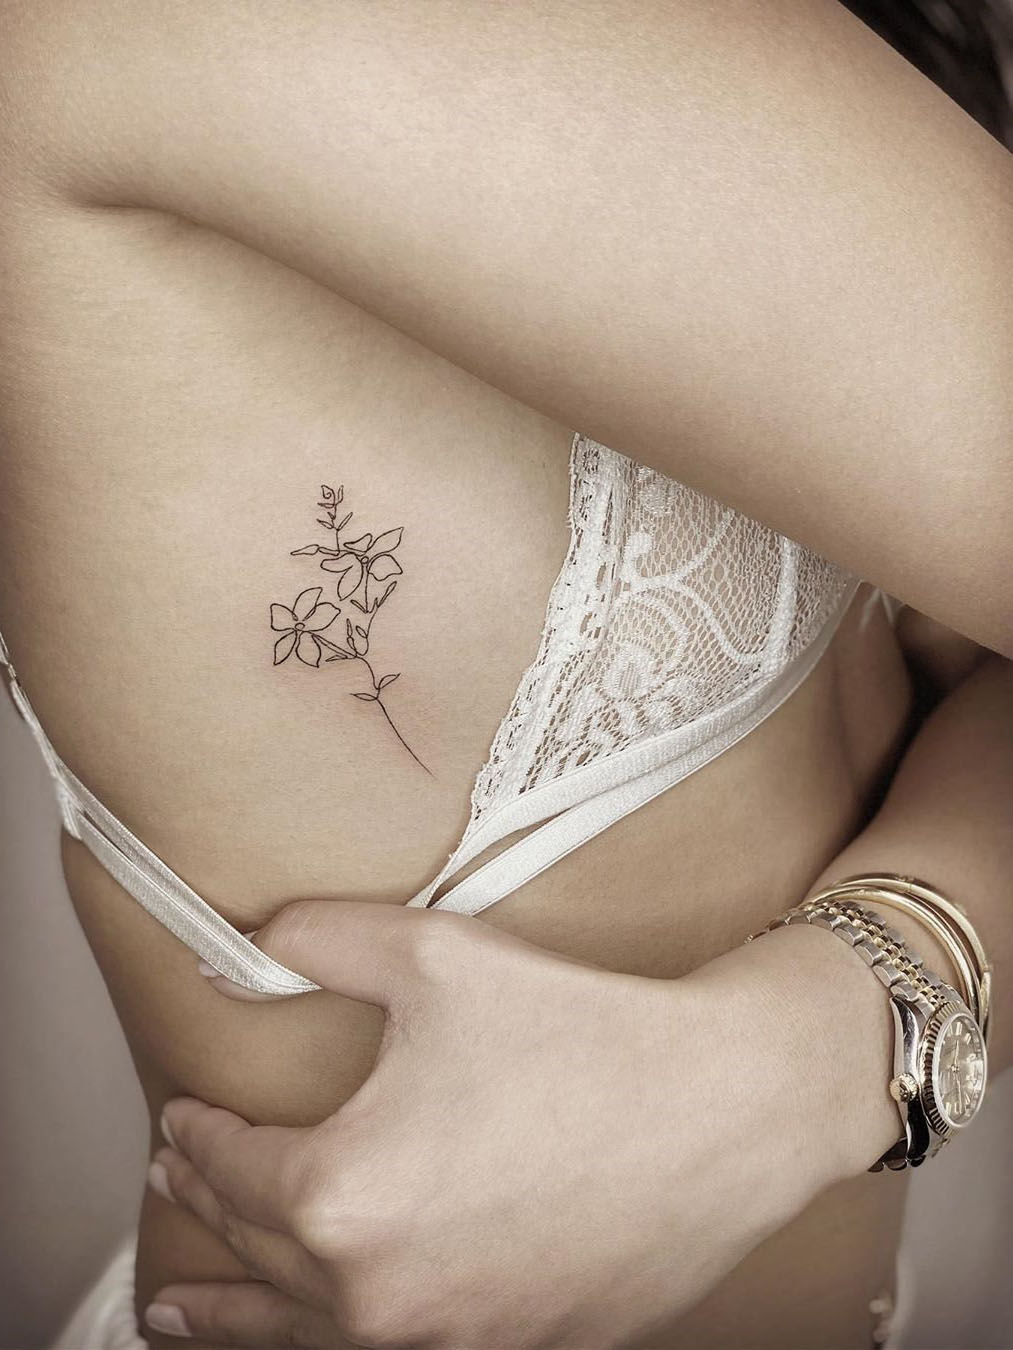 To show you how fashion these small tattoos can be, we have found 50 of the best simple tattoo designs. Whether you like finger or arm tattoos, you will find ideas to suit you. #smalltattoos #tinytattoos